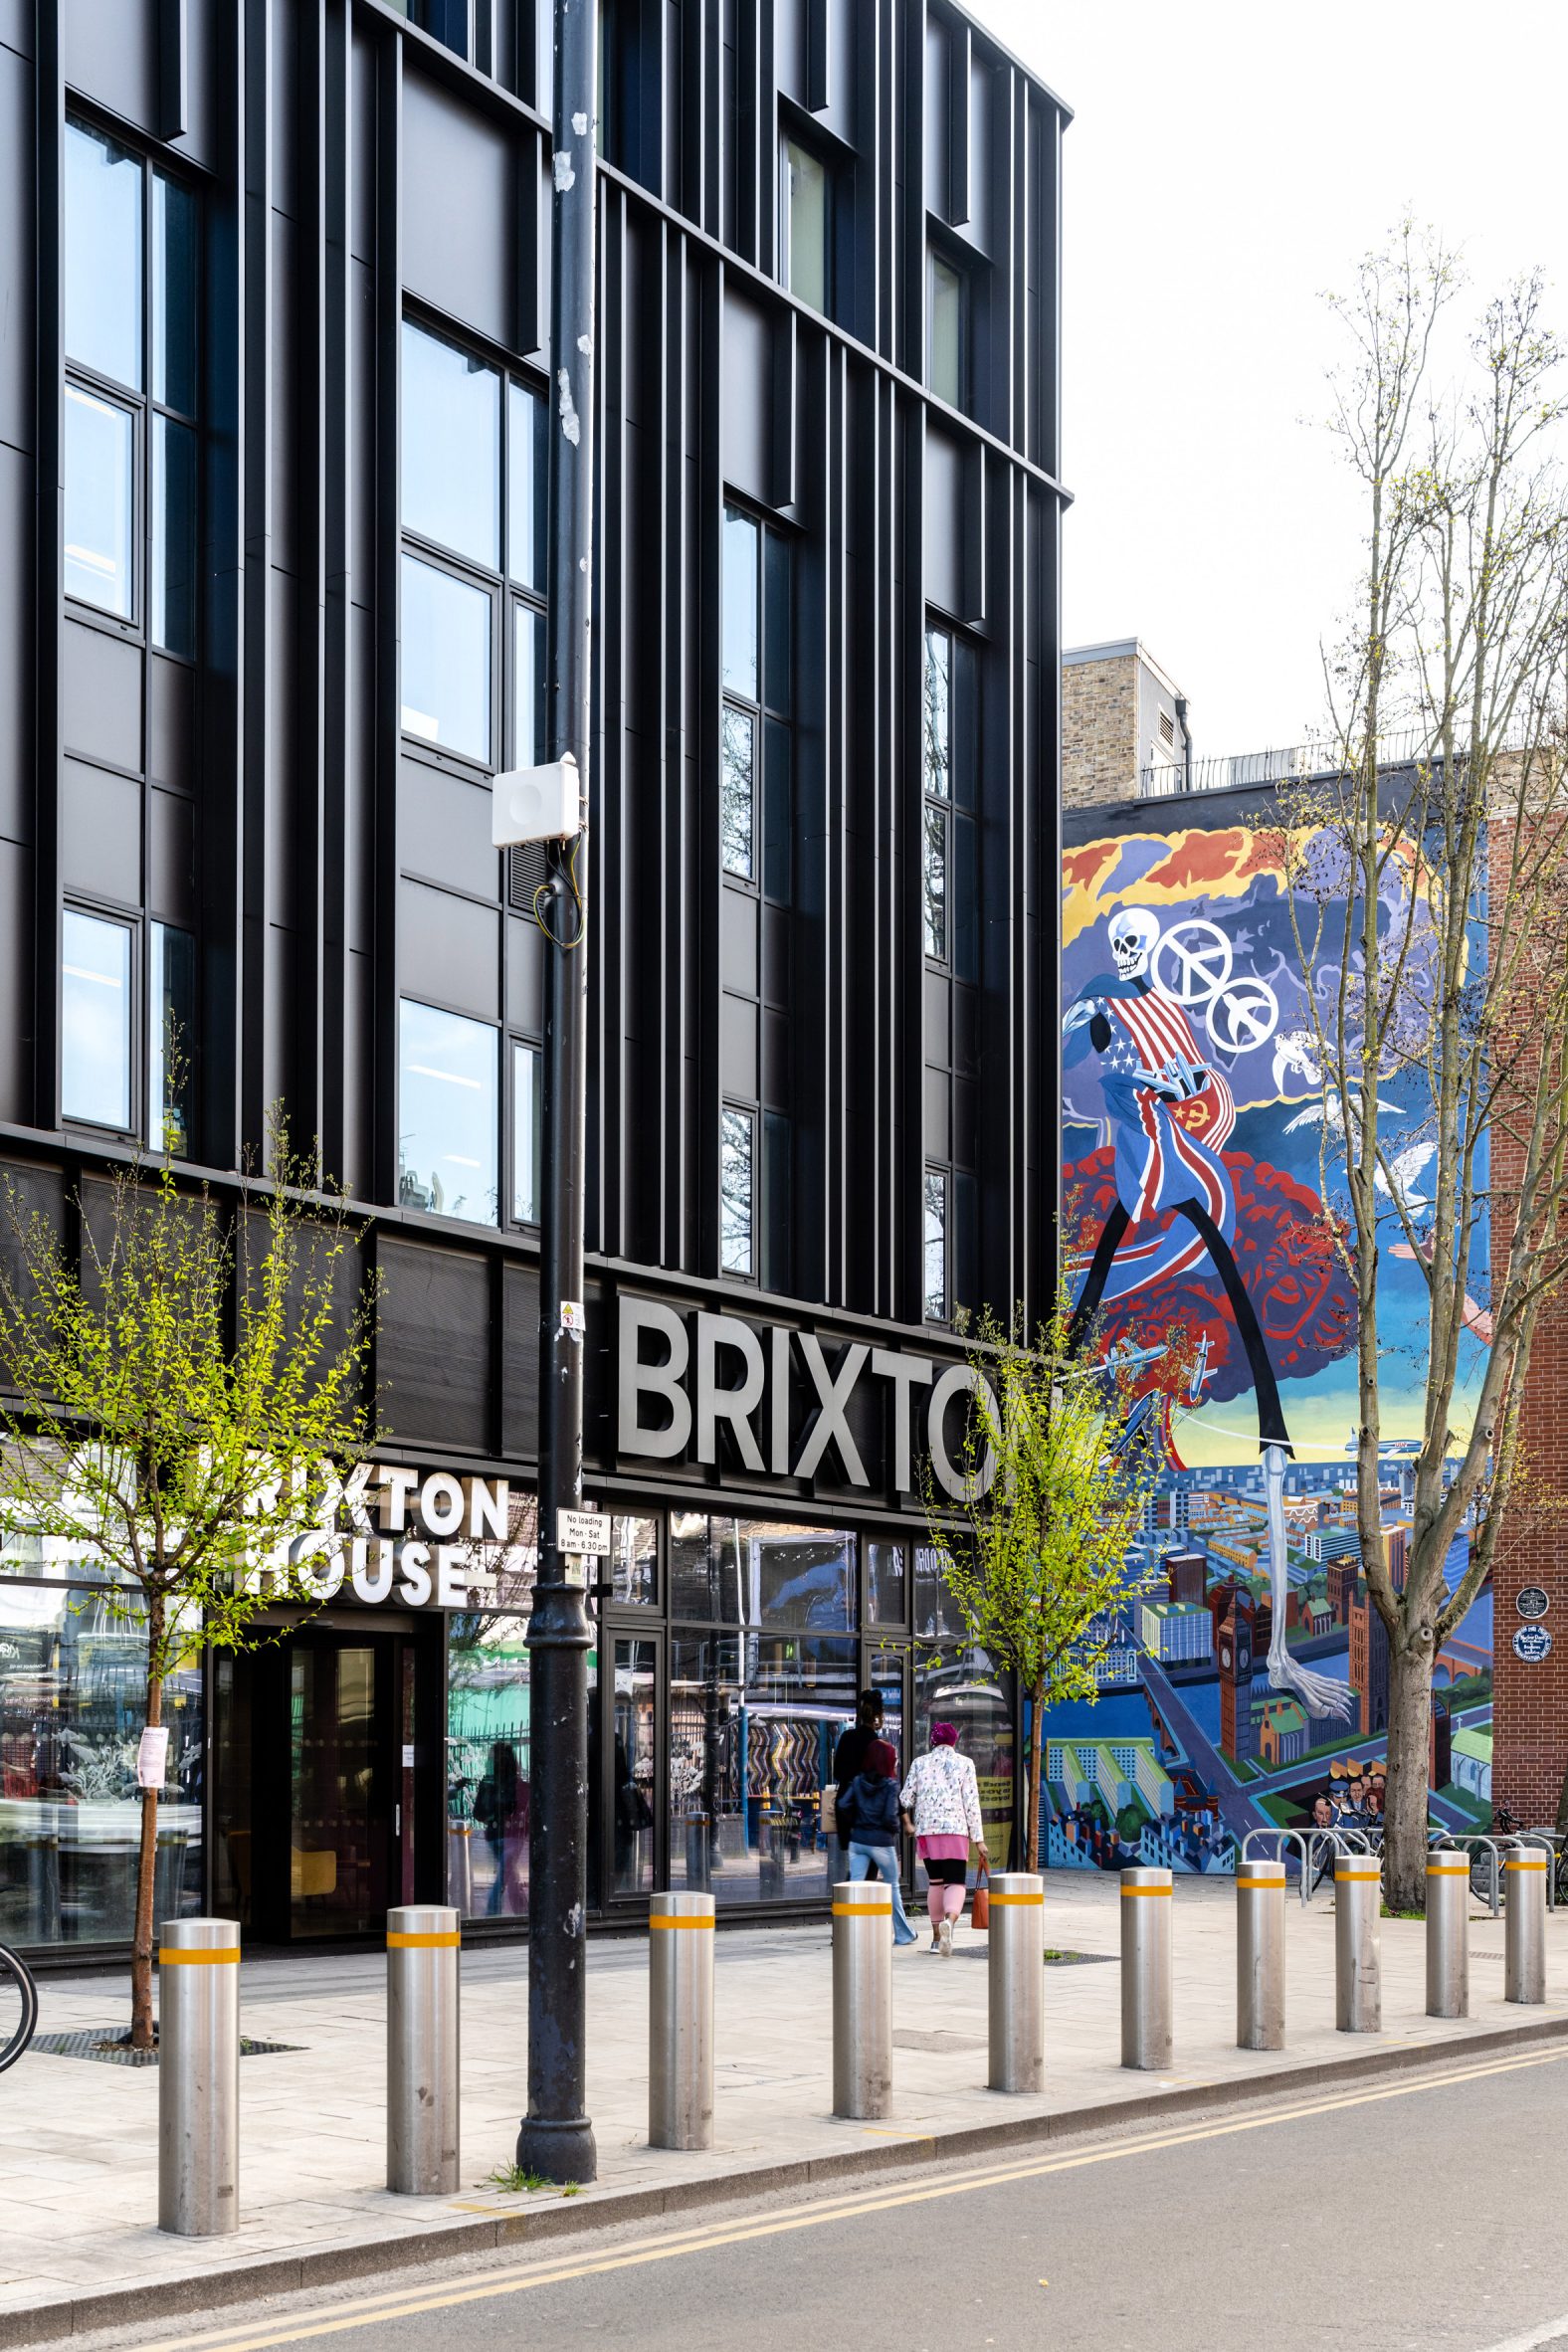 Exterior of the Brixton House theatre in London